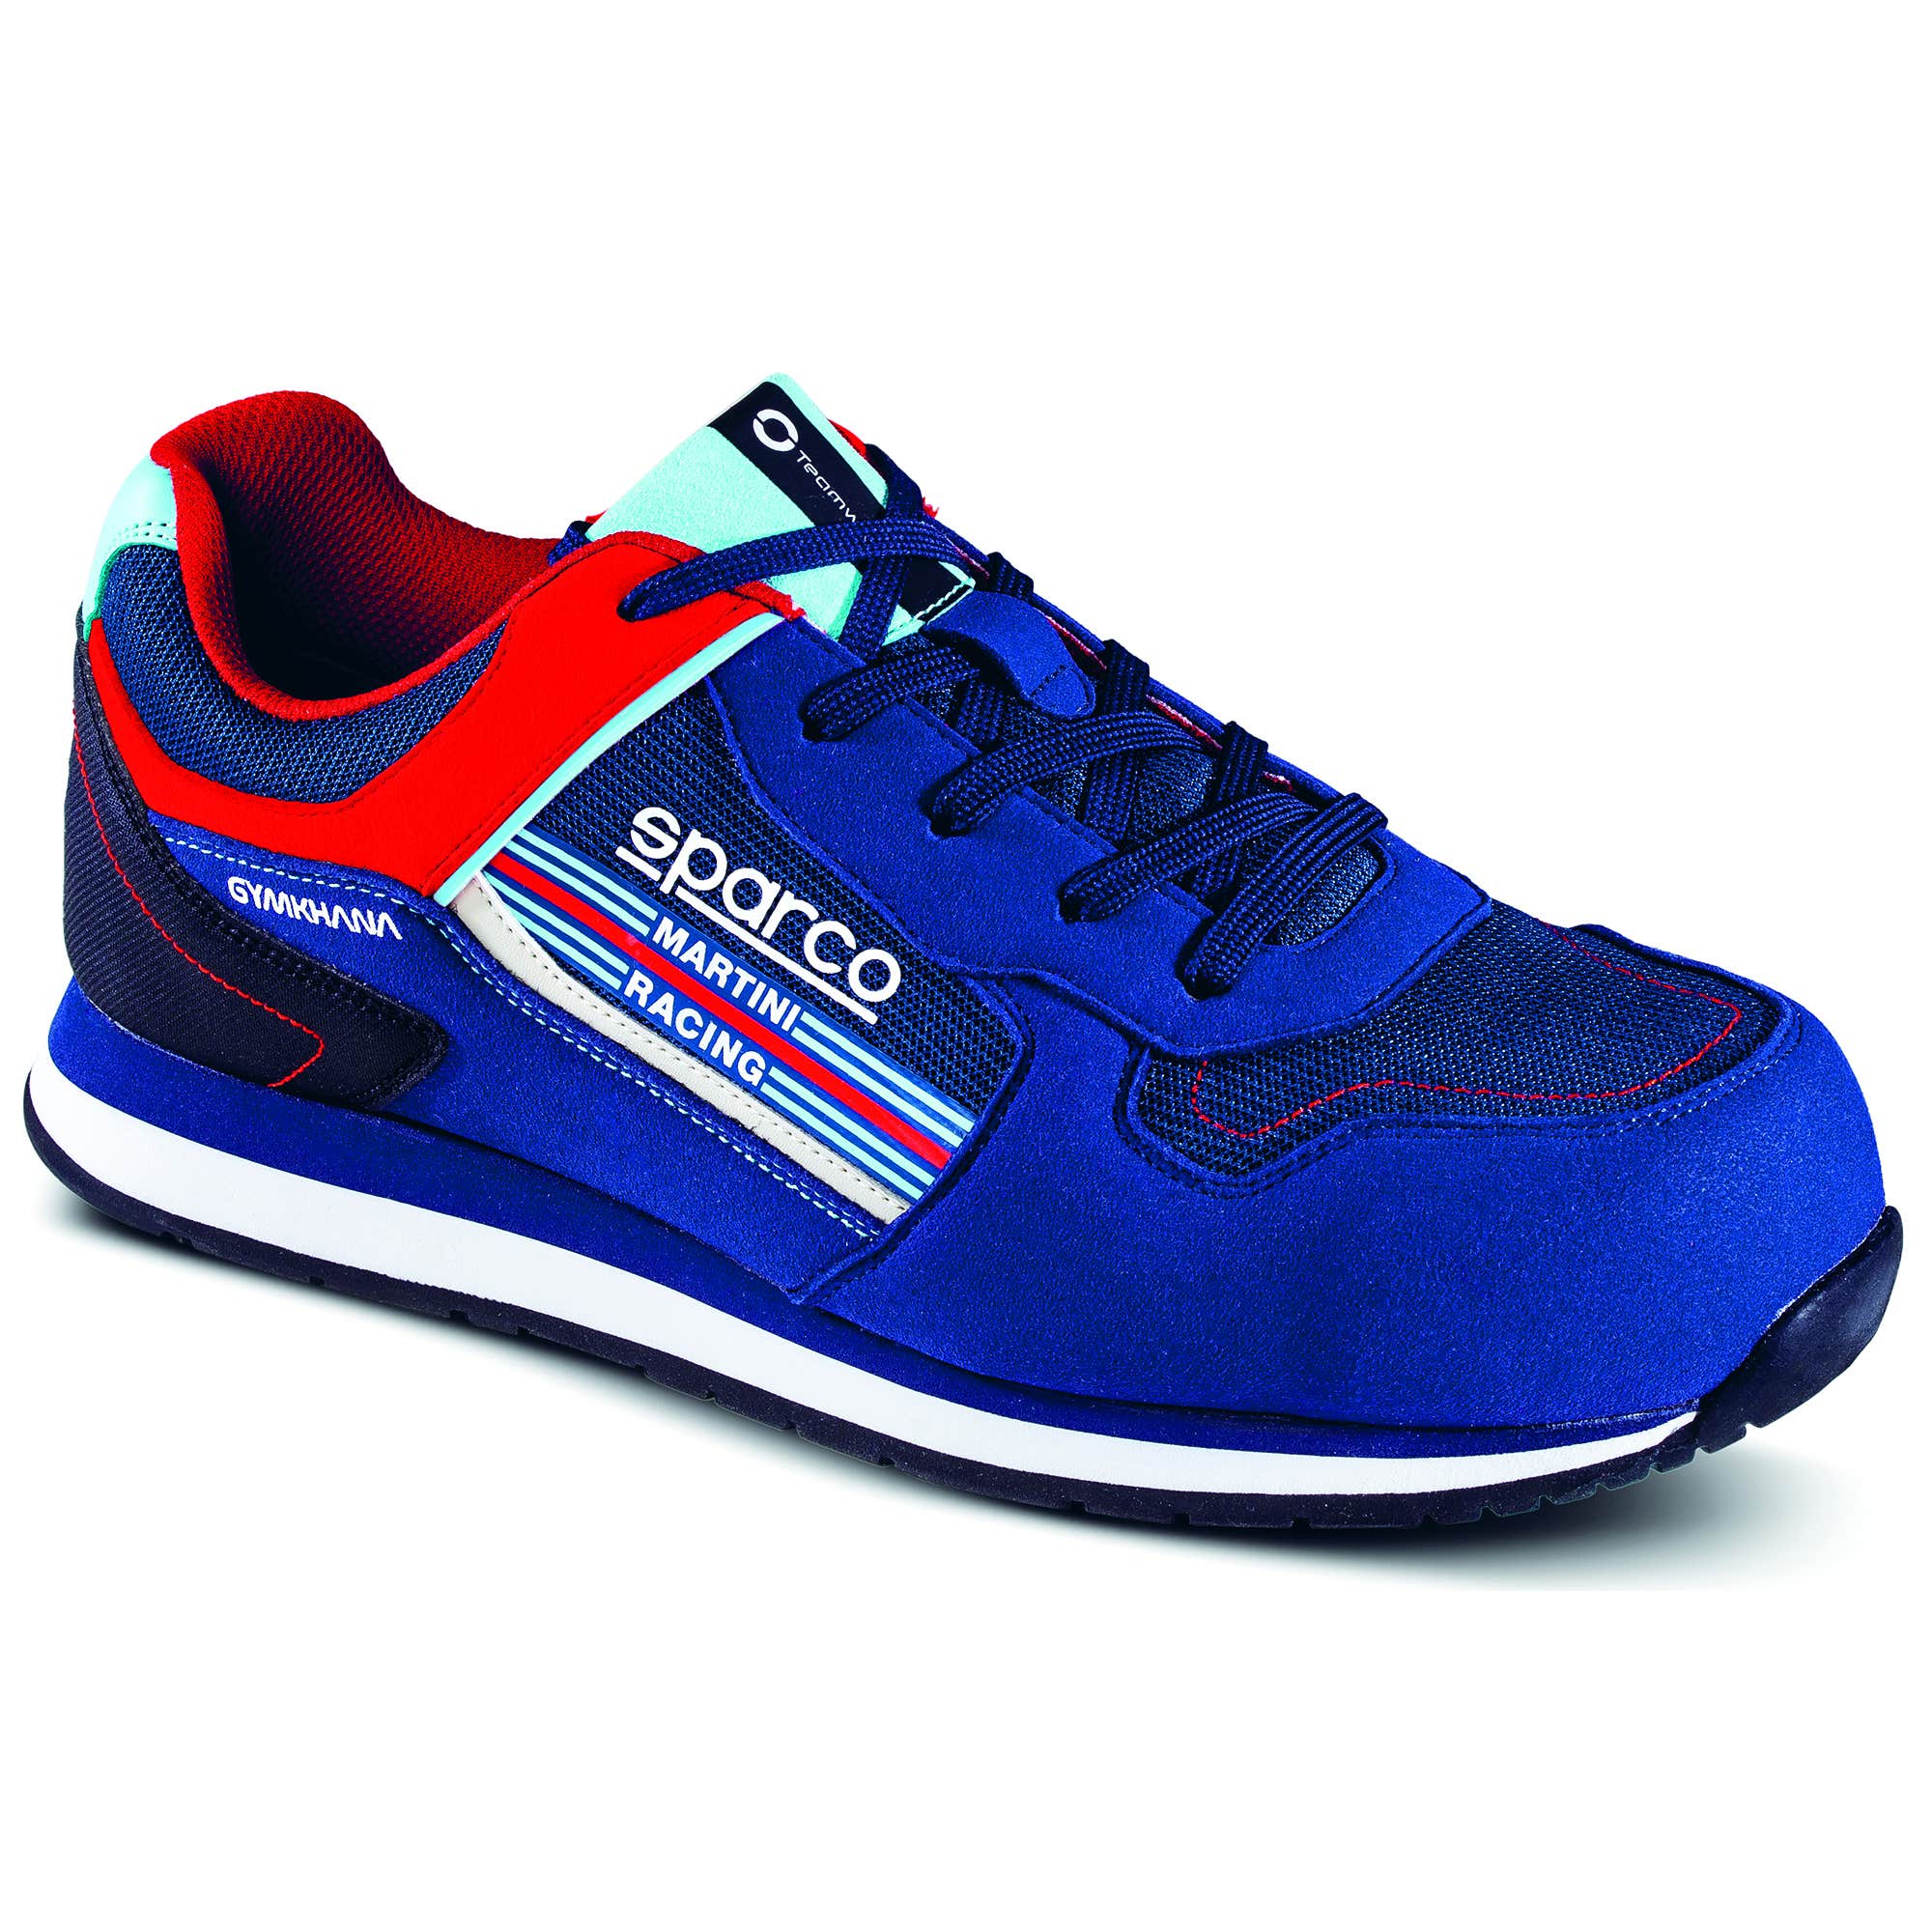 GYMKHANA S1P MARTINI RACING (SAFETY SHOES) - Sparco Shop